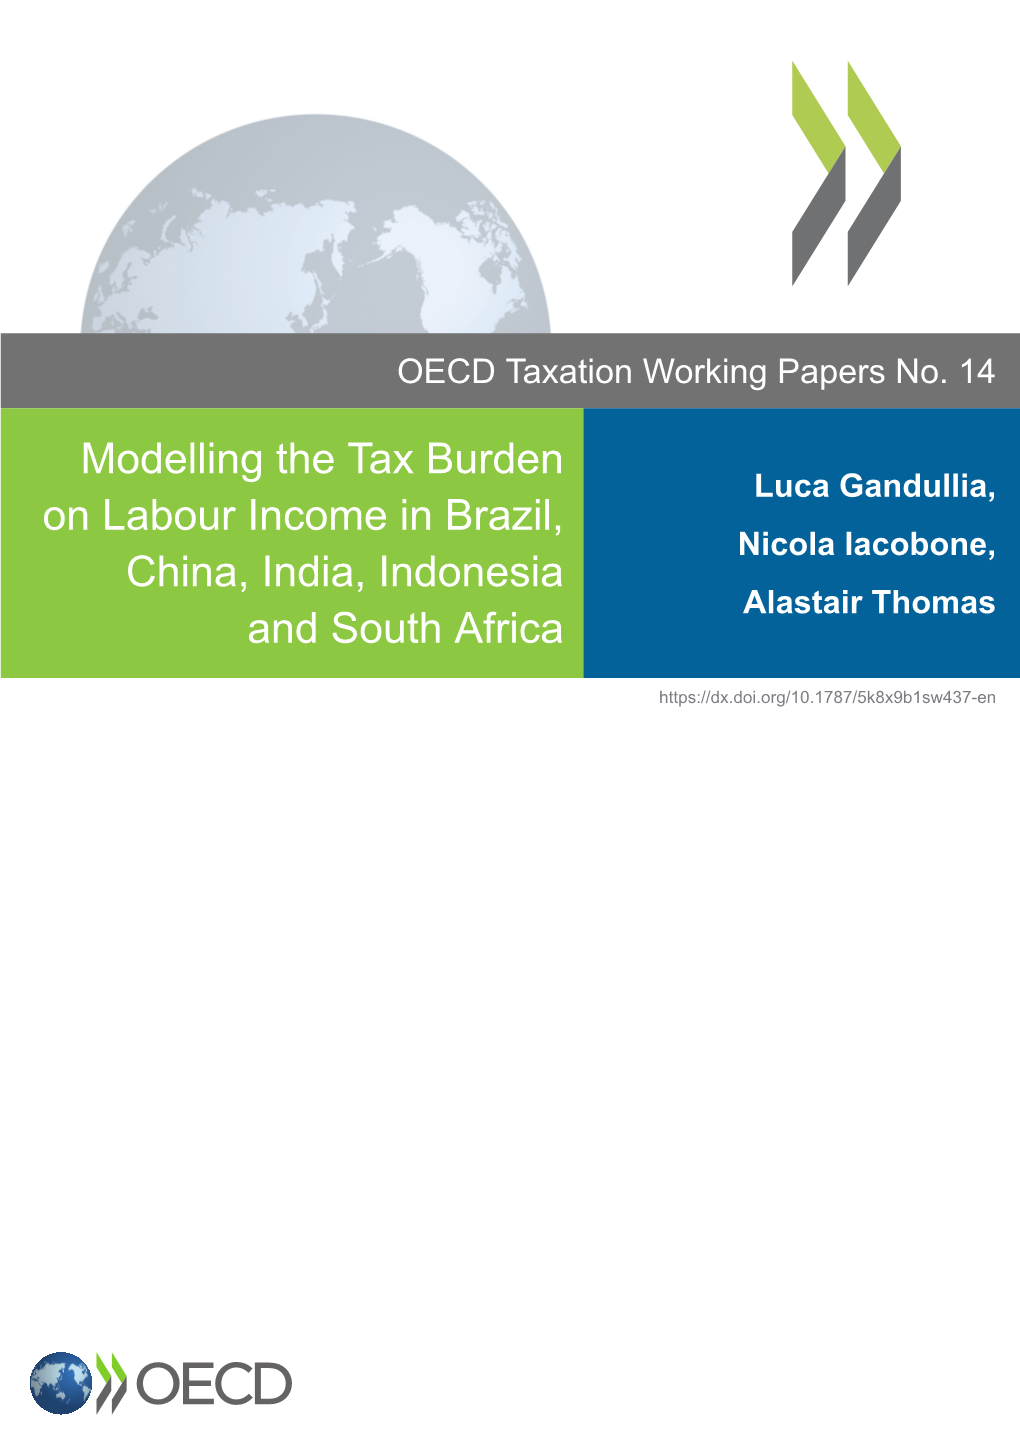 Modelling the Tax Burden on Labour Income in Brazil, China, India, Indonesia and South Africa